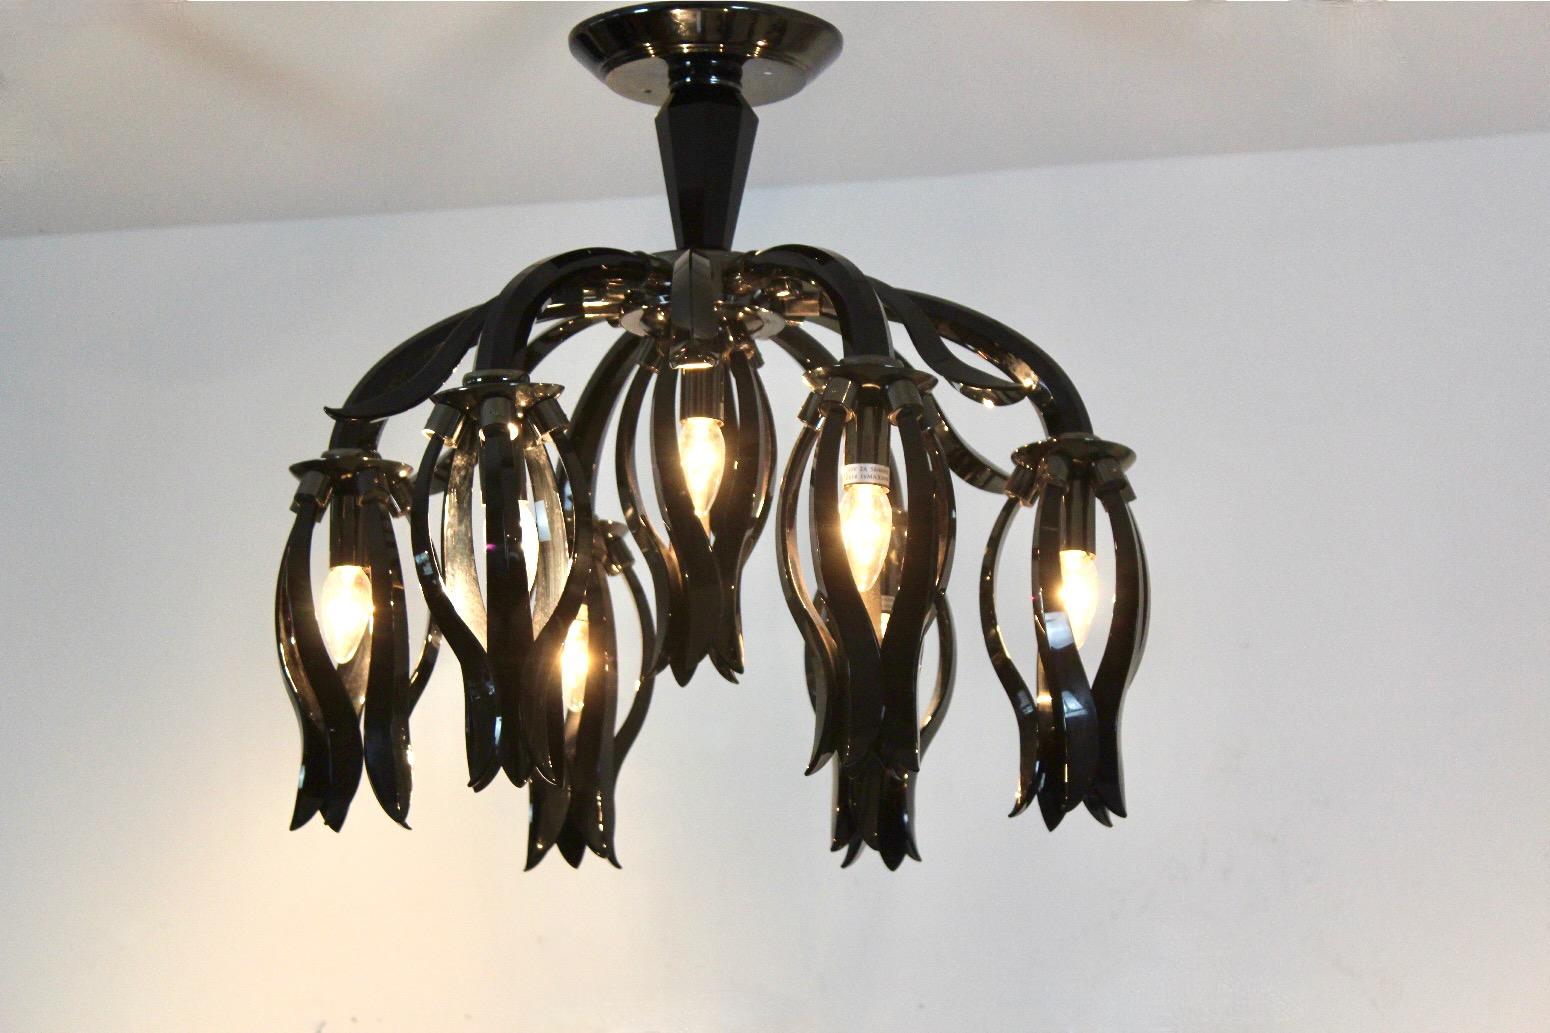 Stunning Italian Black Glass Chandelier by Barovier & Toso In Good Condition For Sale In Voorburg, NL